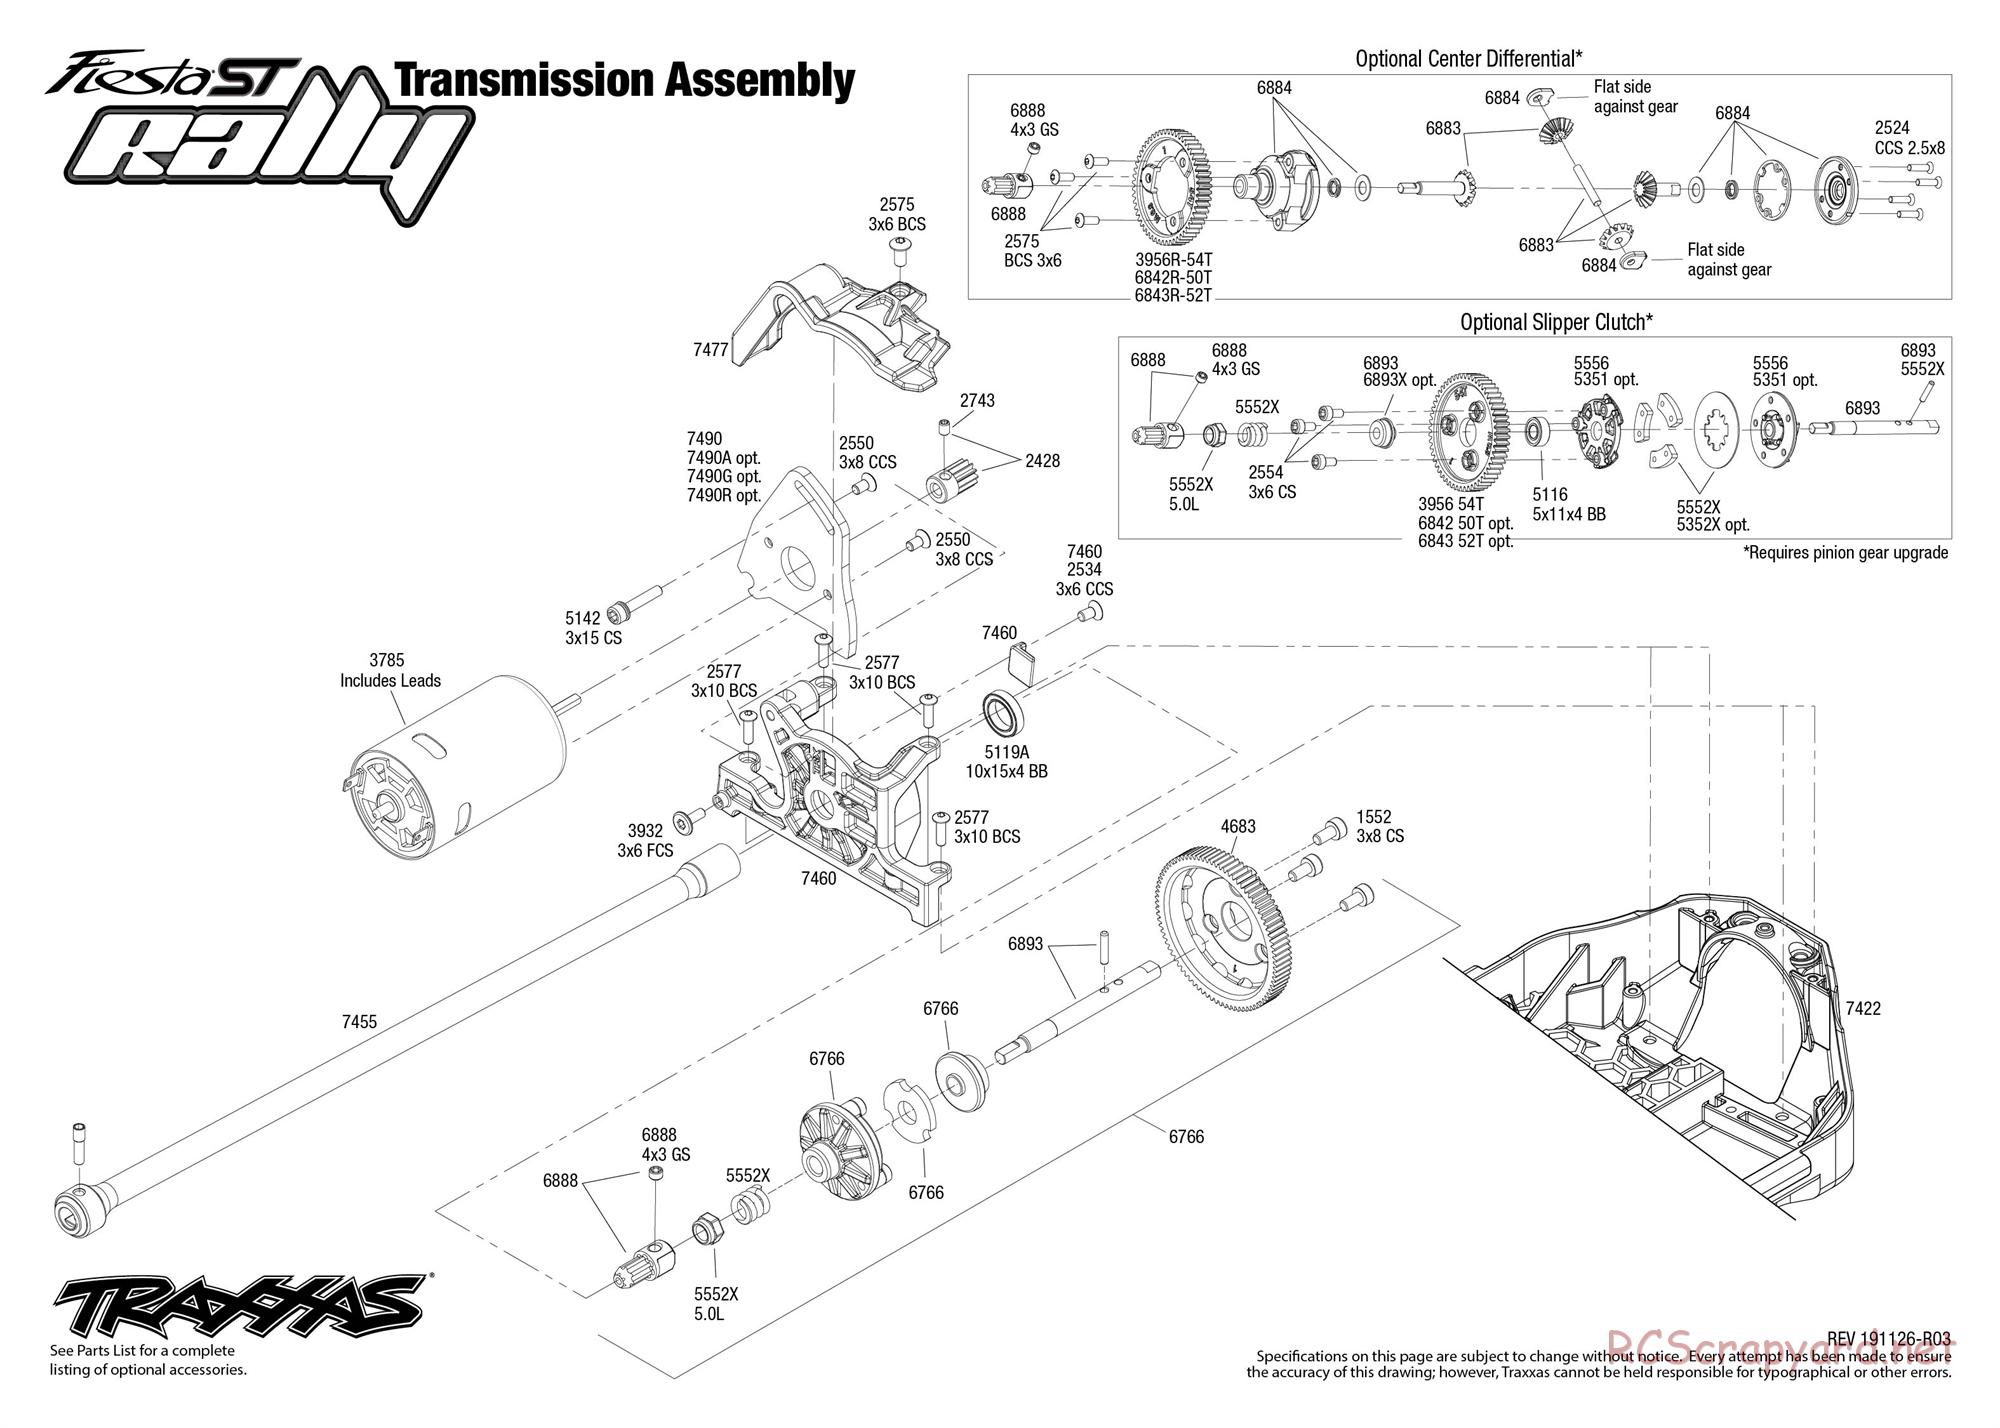 Traxxas - VR46 Ford Fiesta ST Rally SE (2018) - Exploded Views - Page 5